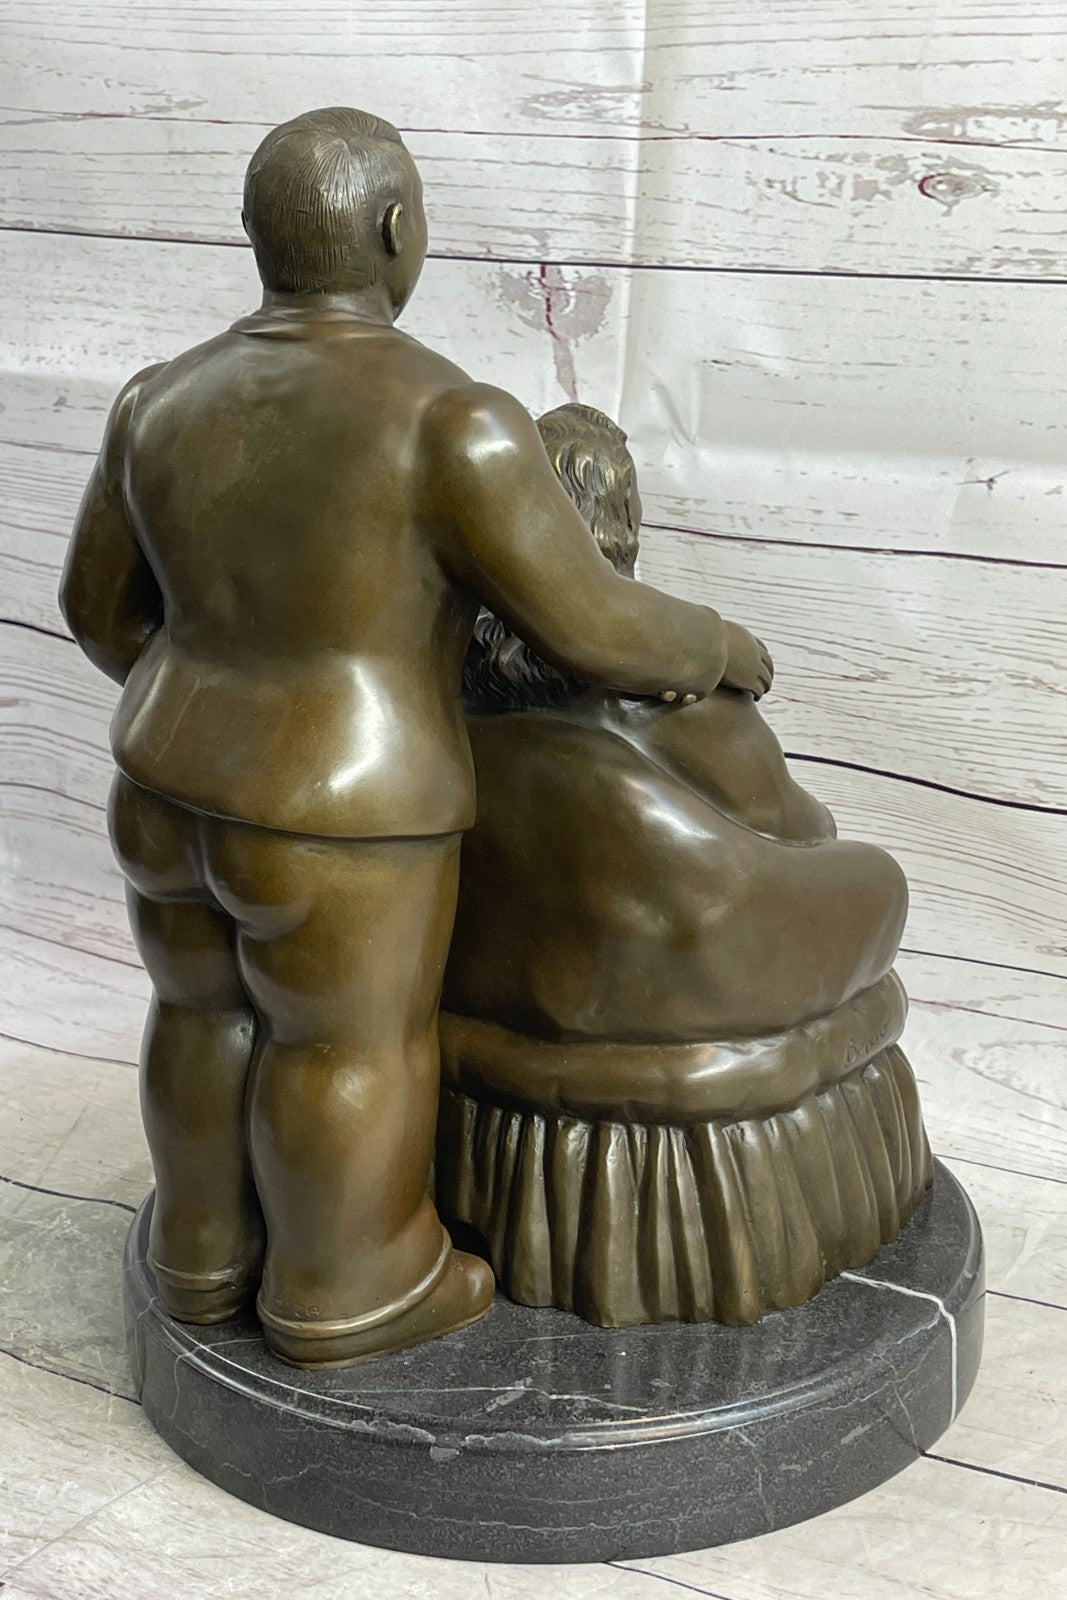 Extra Large Museum Quality Classic Botero Couple Artwork Home Office Decoration Sale